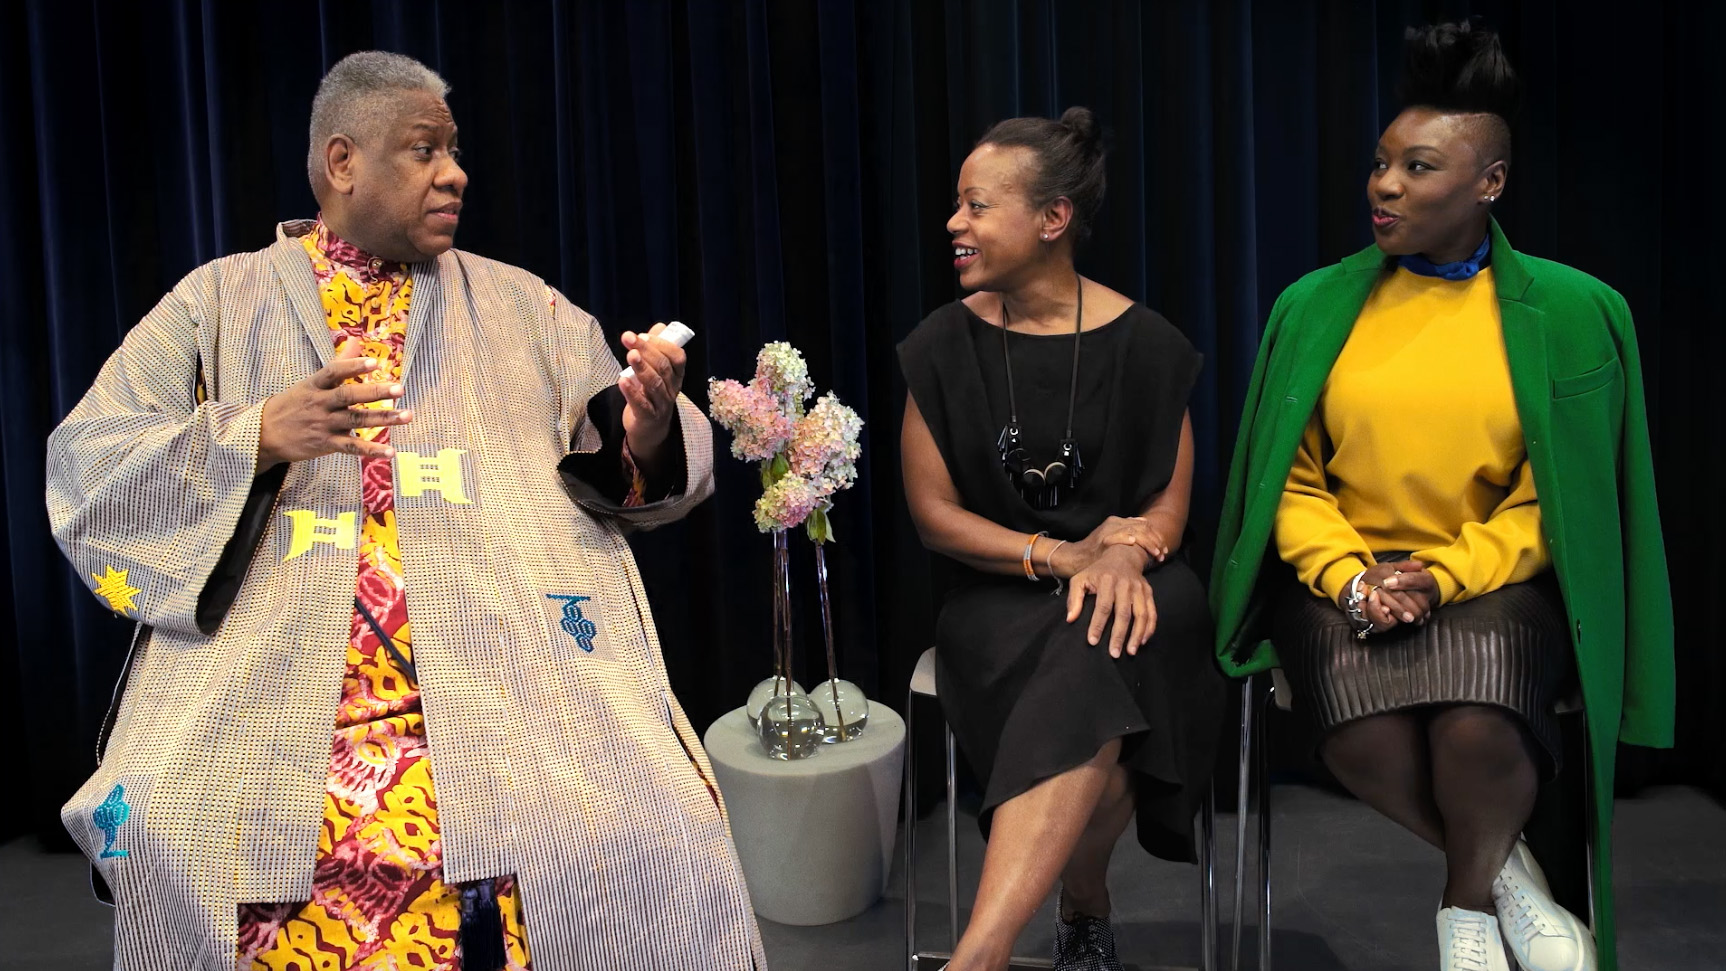 André Leon Talley in convesrsation with Mimi Plange and Tracy Reese